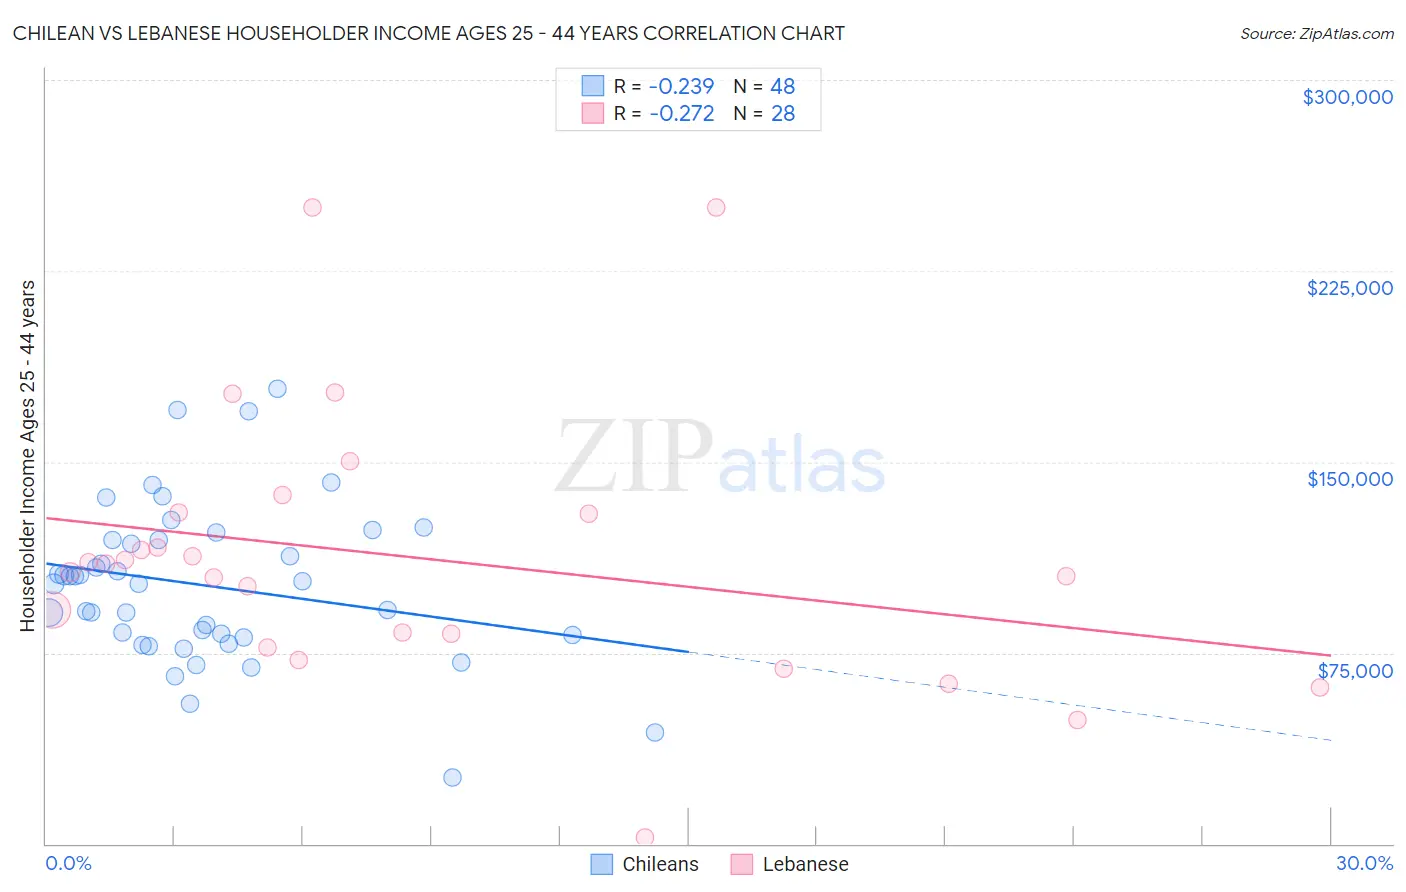 Chilean vs Lebanese Householder Income Ages 25 - 44 years